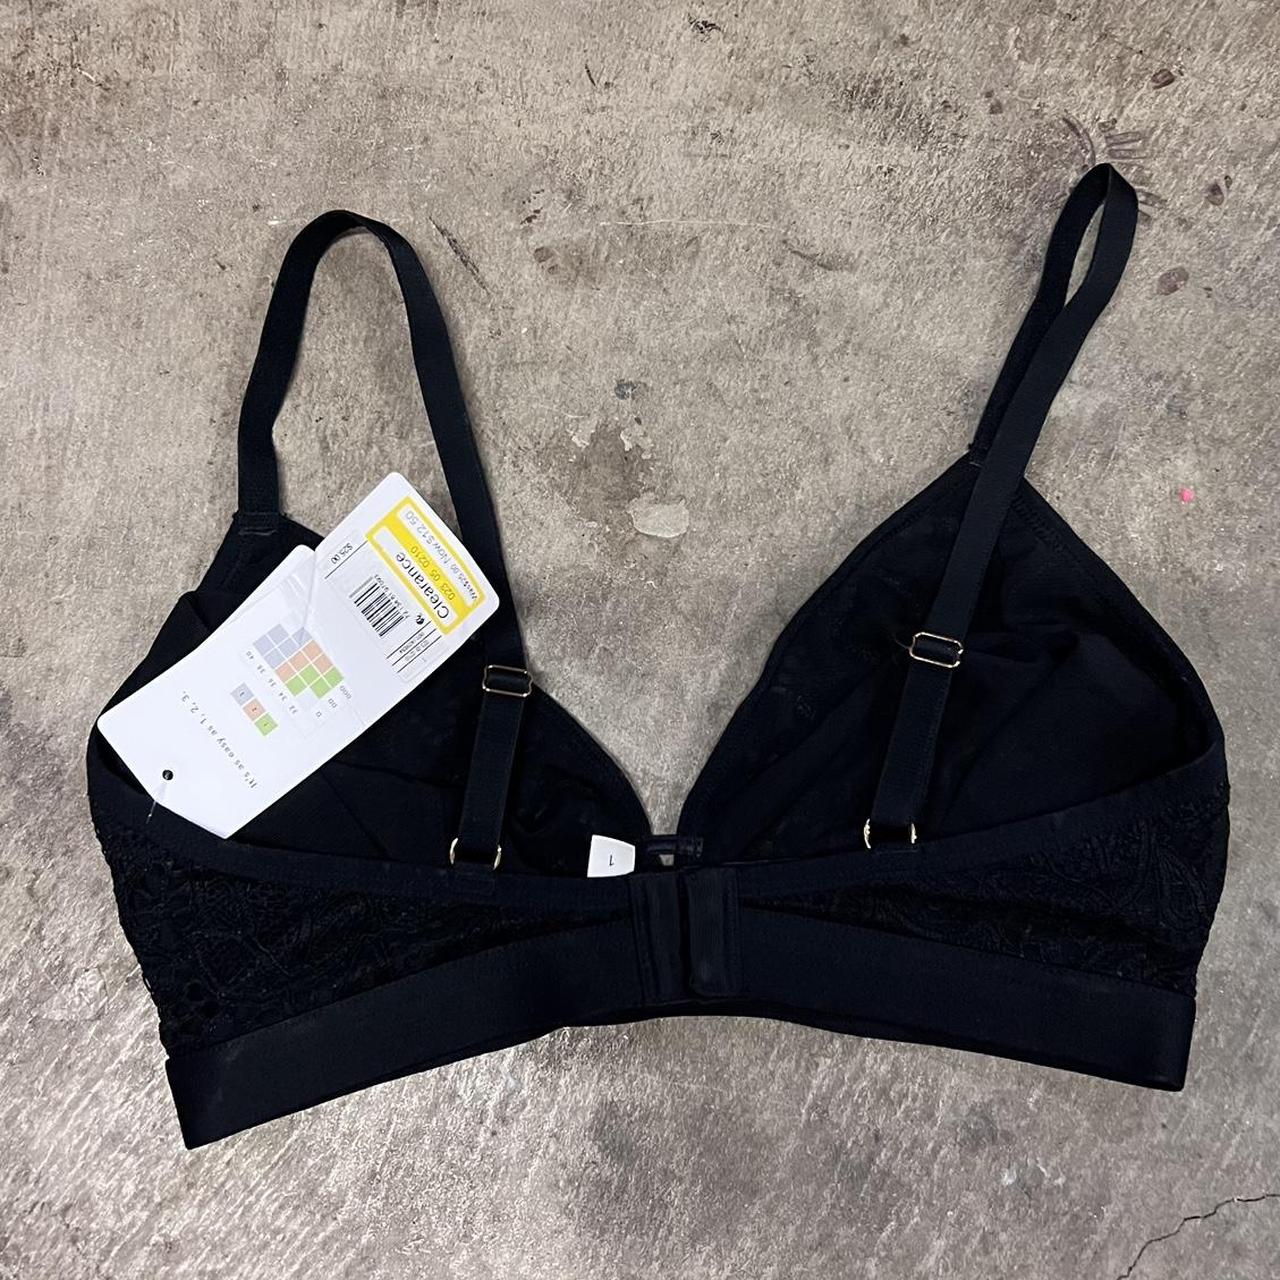 All. You. Lively. From Target bra top. Size 1 which - Depop